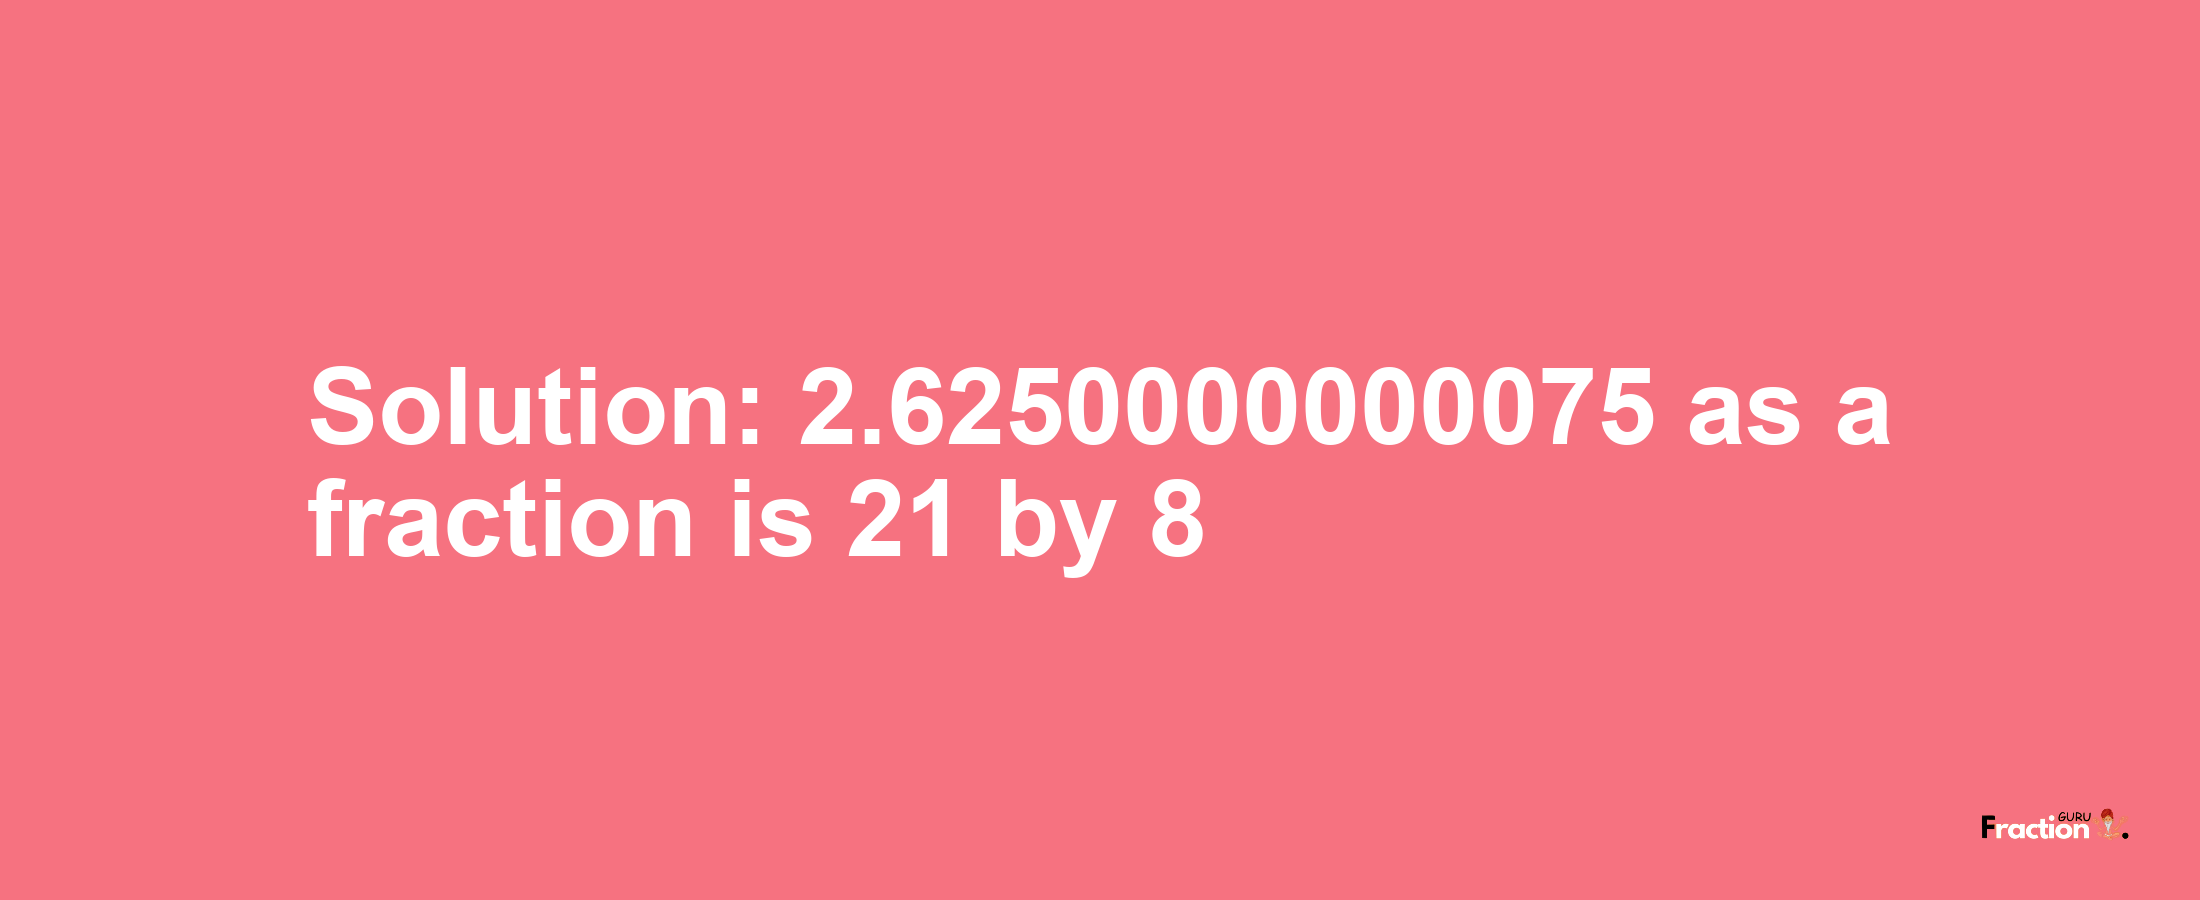 Solution:2.6250000000075 as a fraction is 21/8